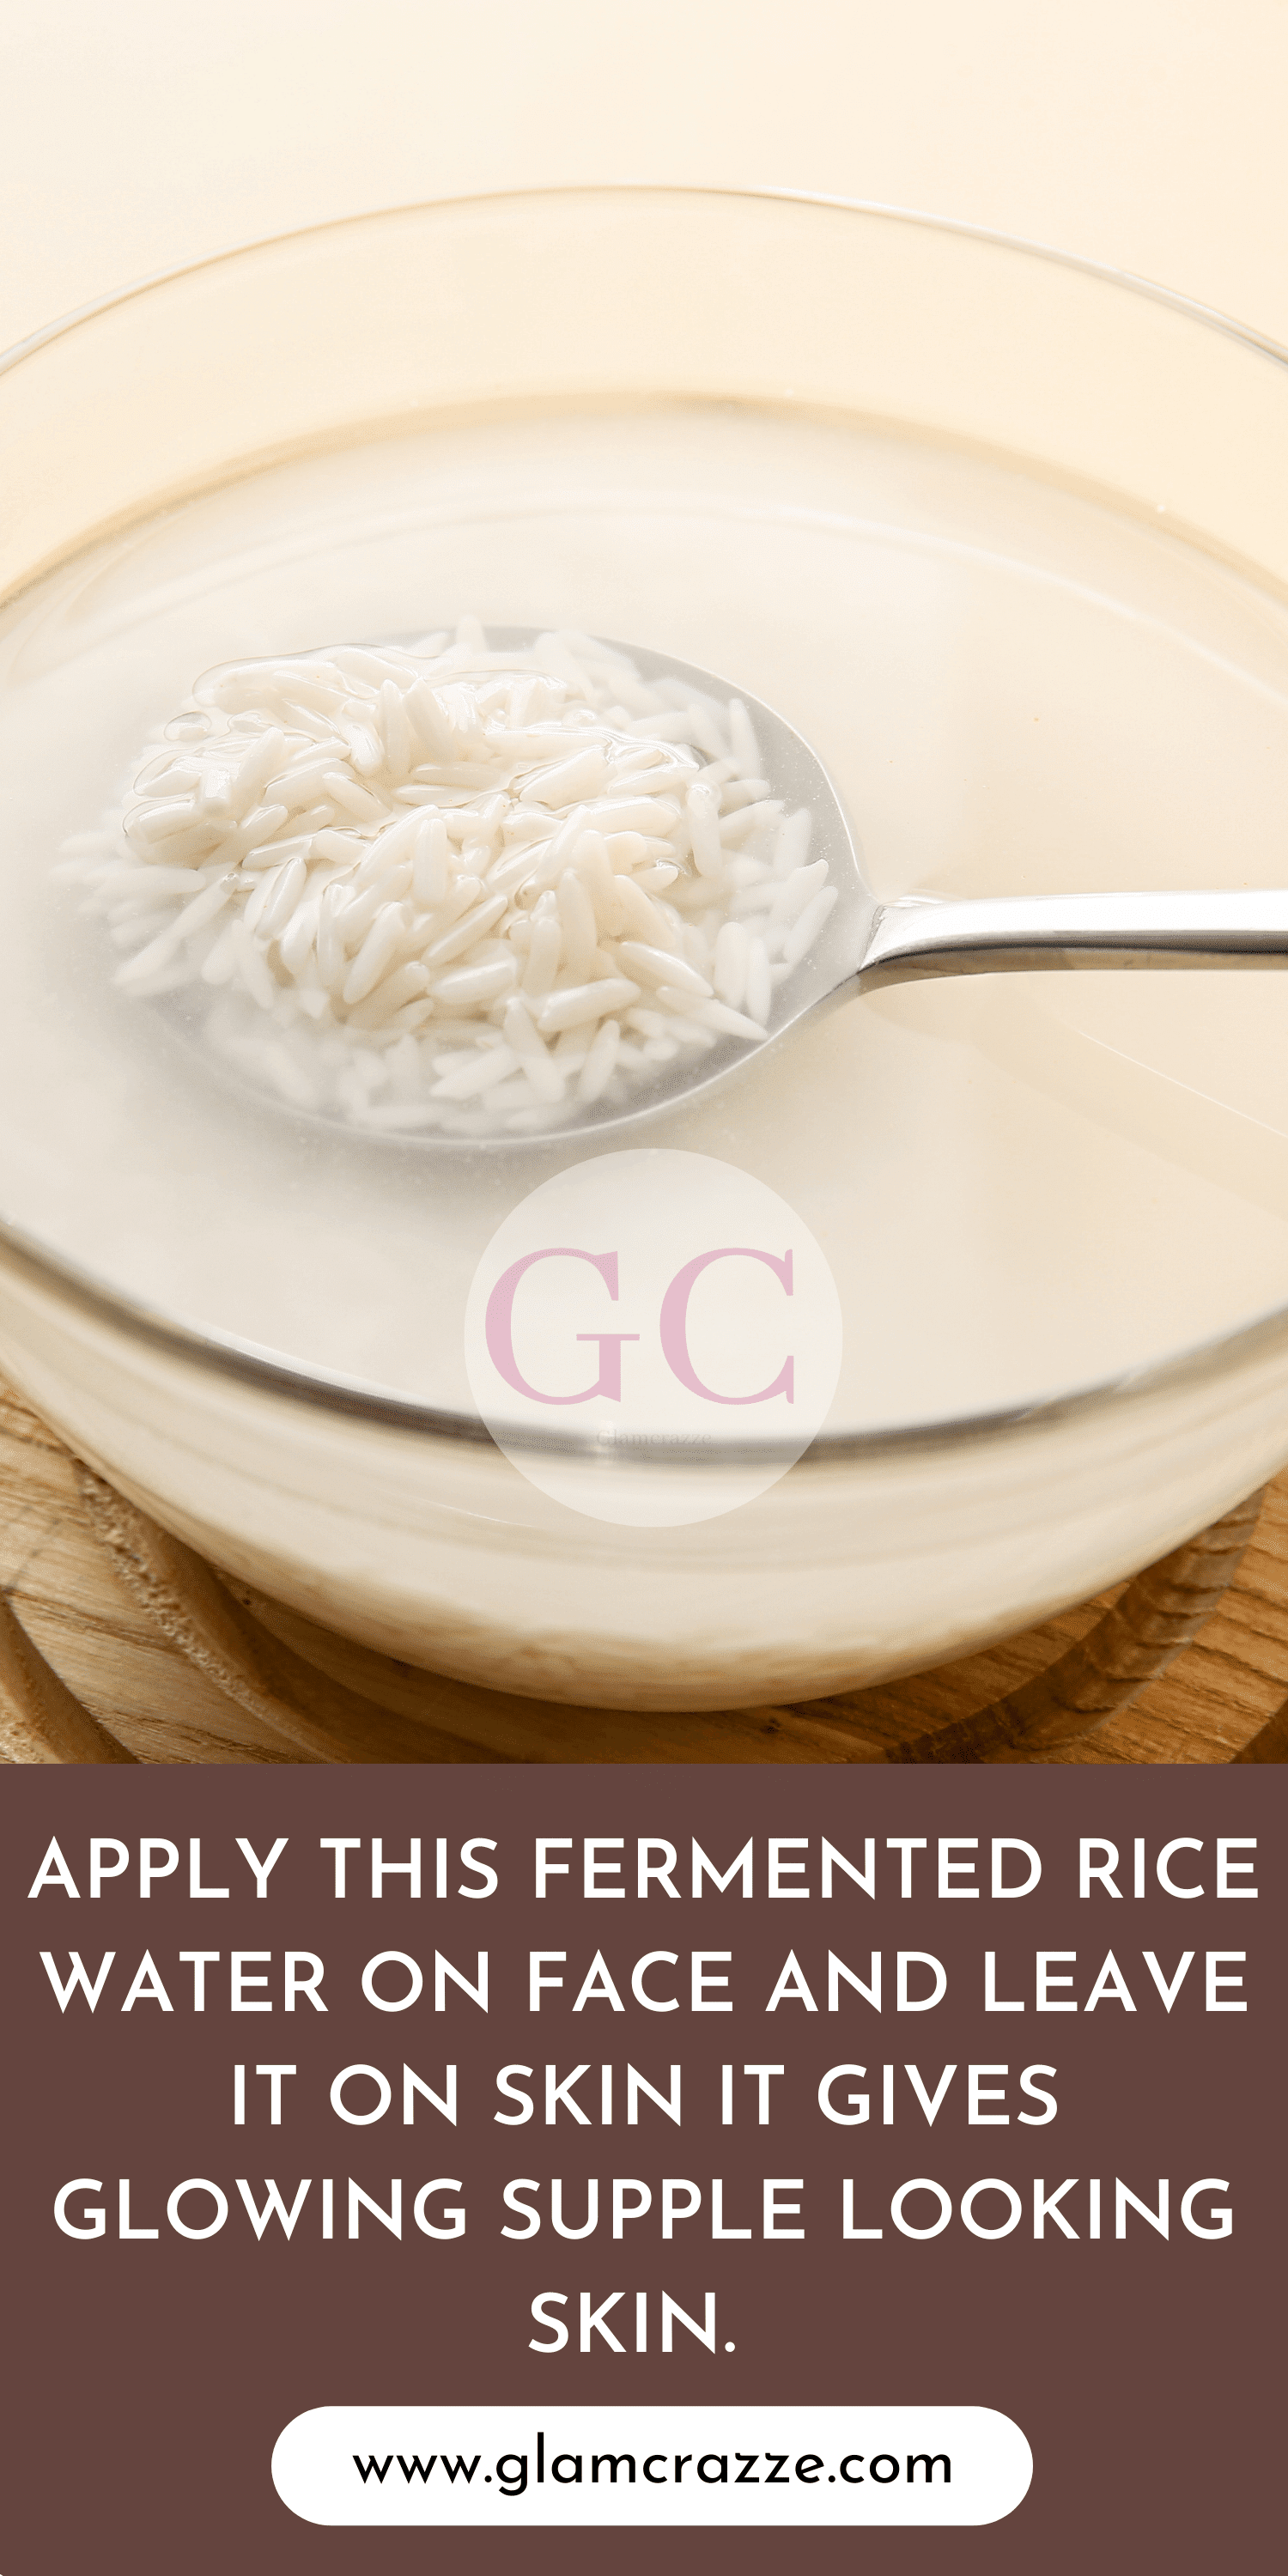 Benefits of fermented rice water on skin